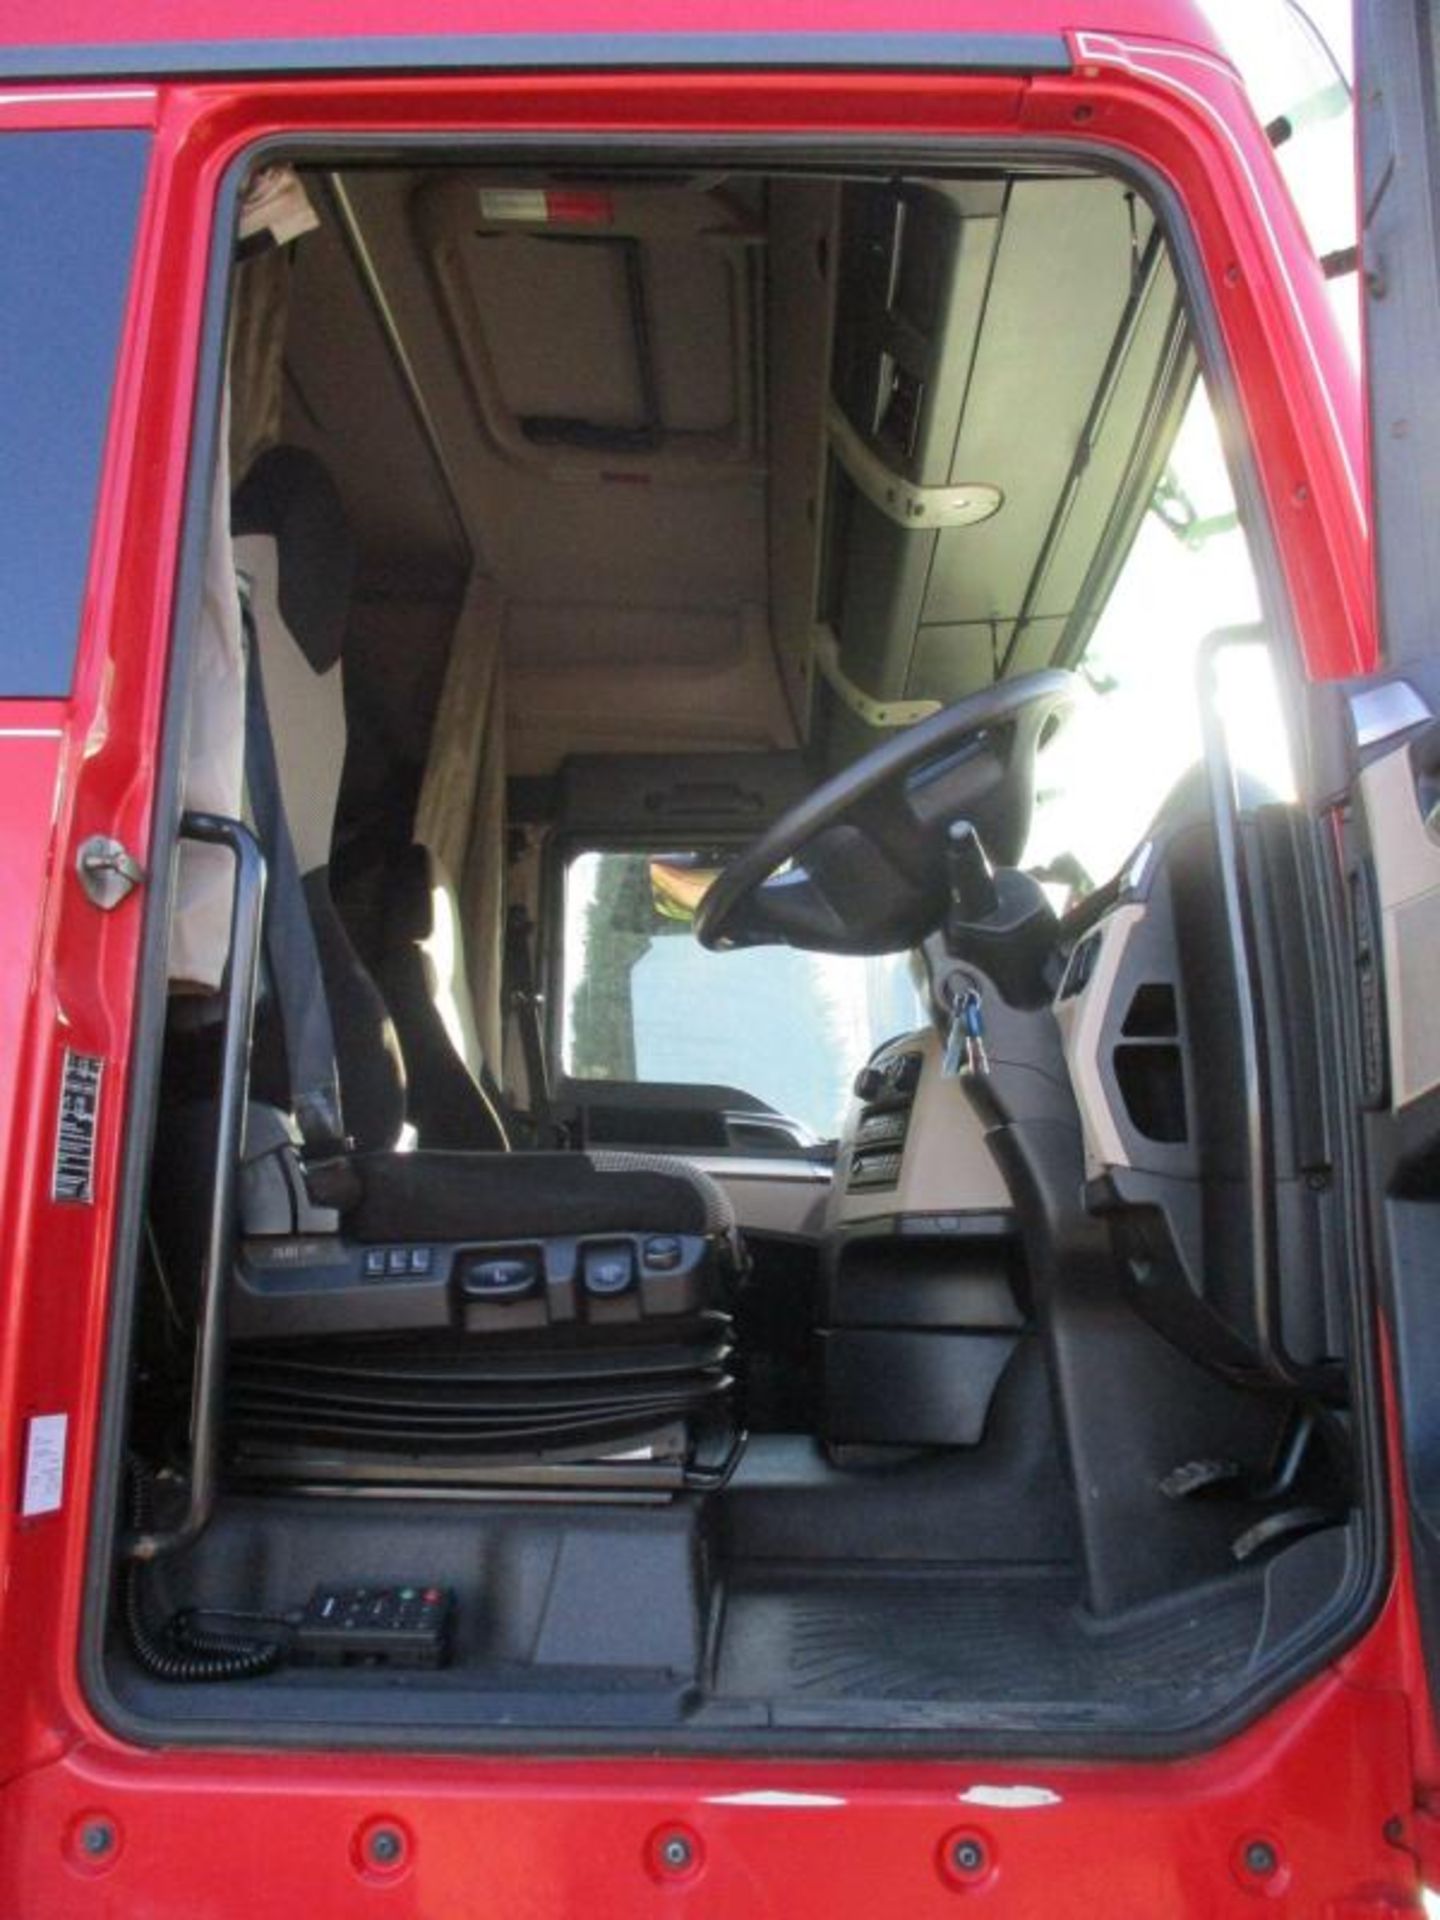 CLIMATE-CONTROLLED CABIN: MAN TGX 460 XXL WITH AIR CON AND HEATED SEAT - Image 17 of 23